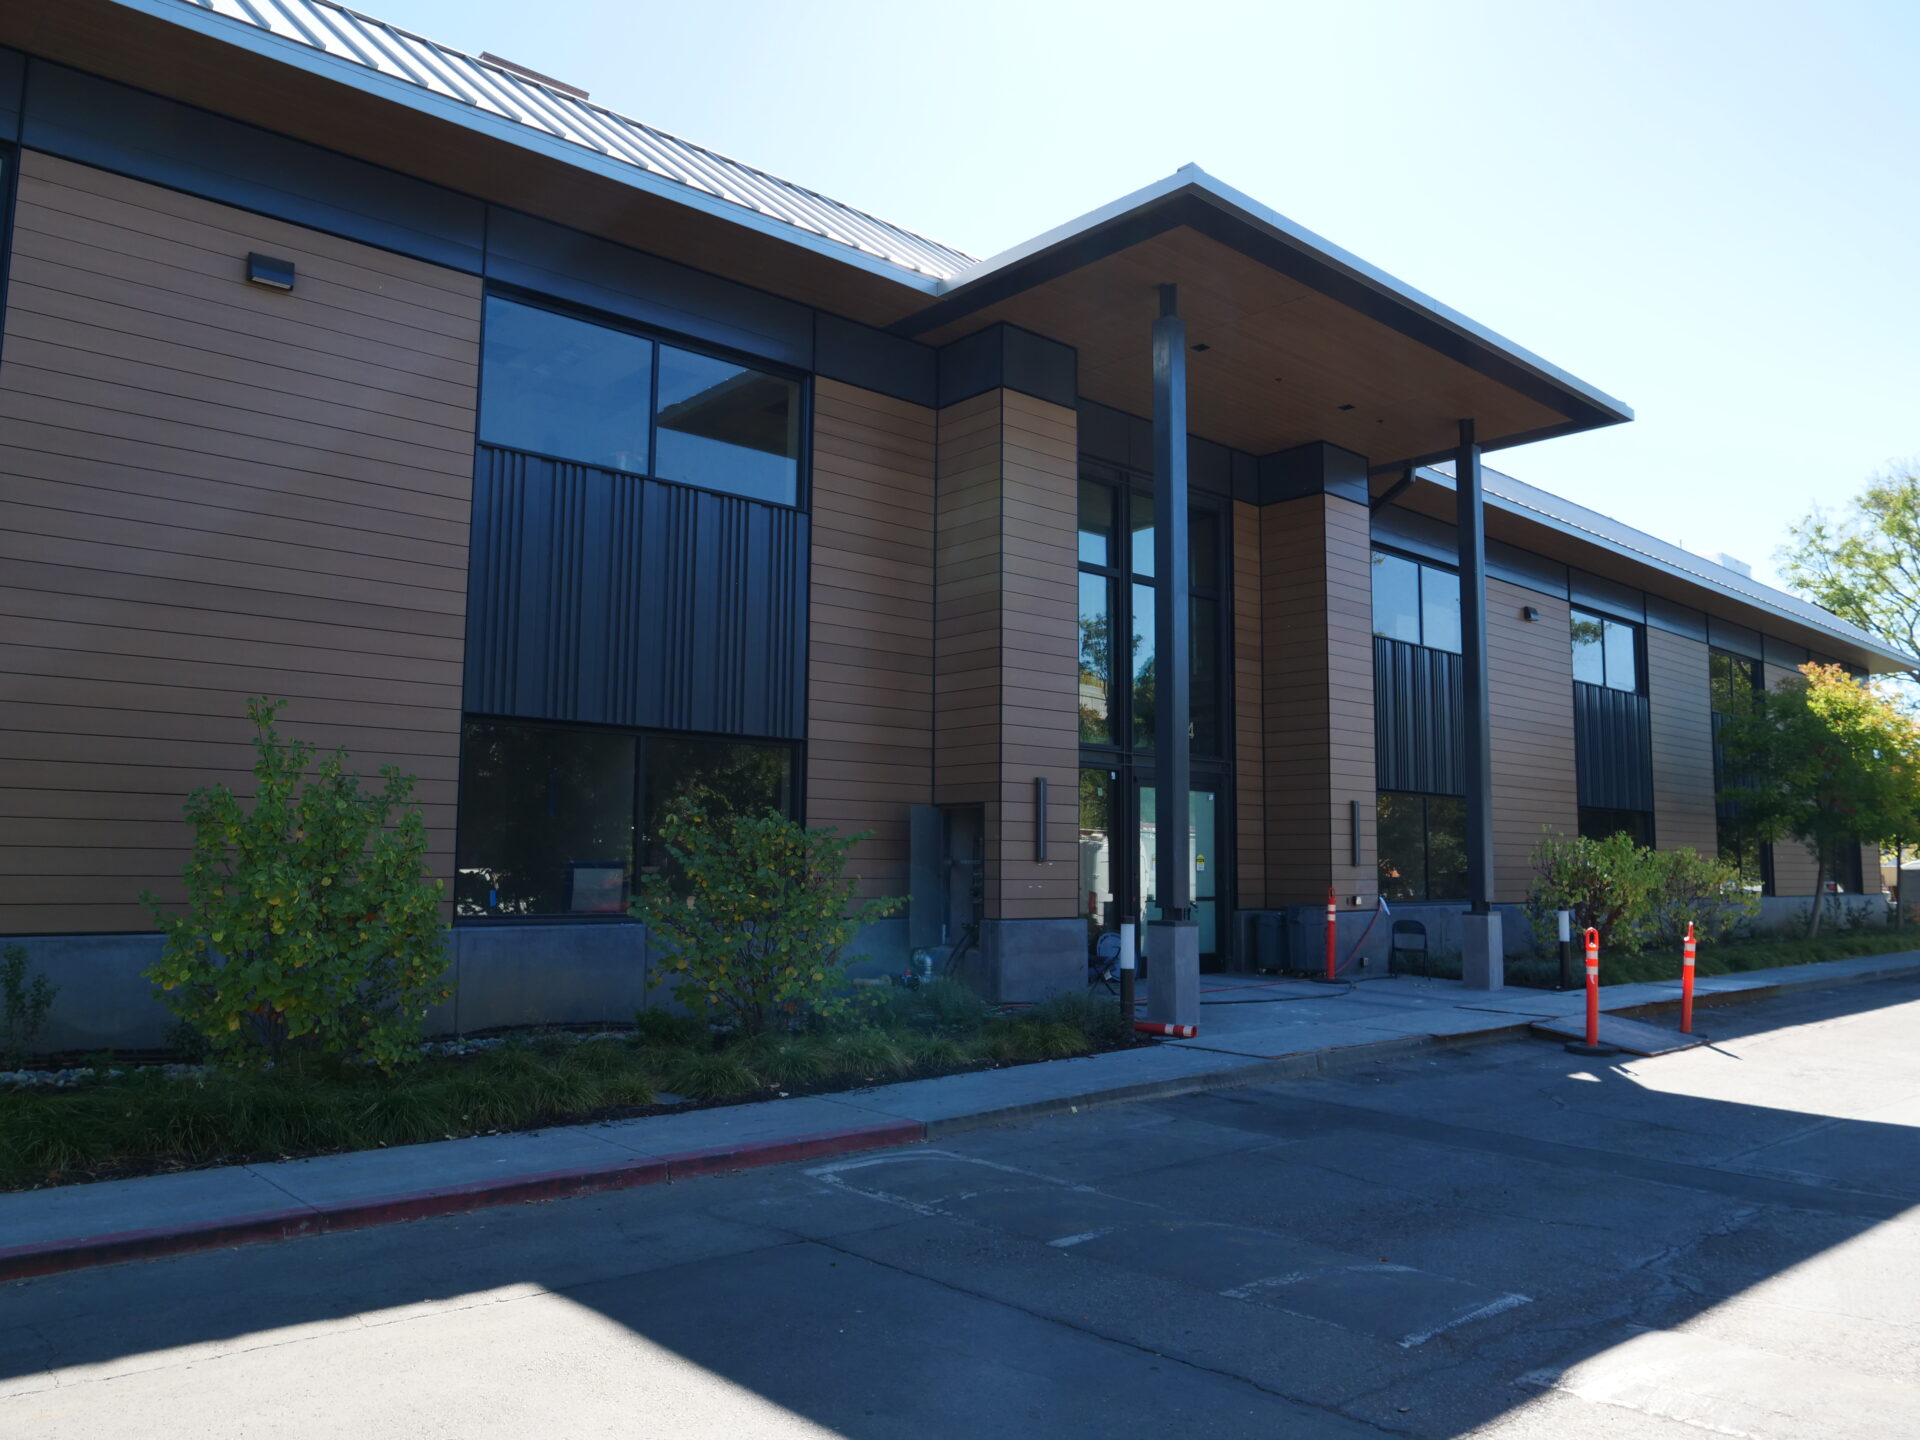 Image from the Gallery: Stanford Facility – Palo Alto, CA